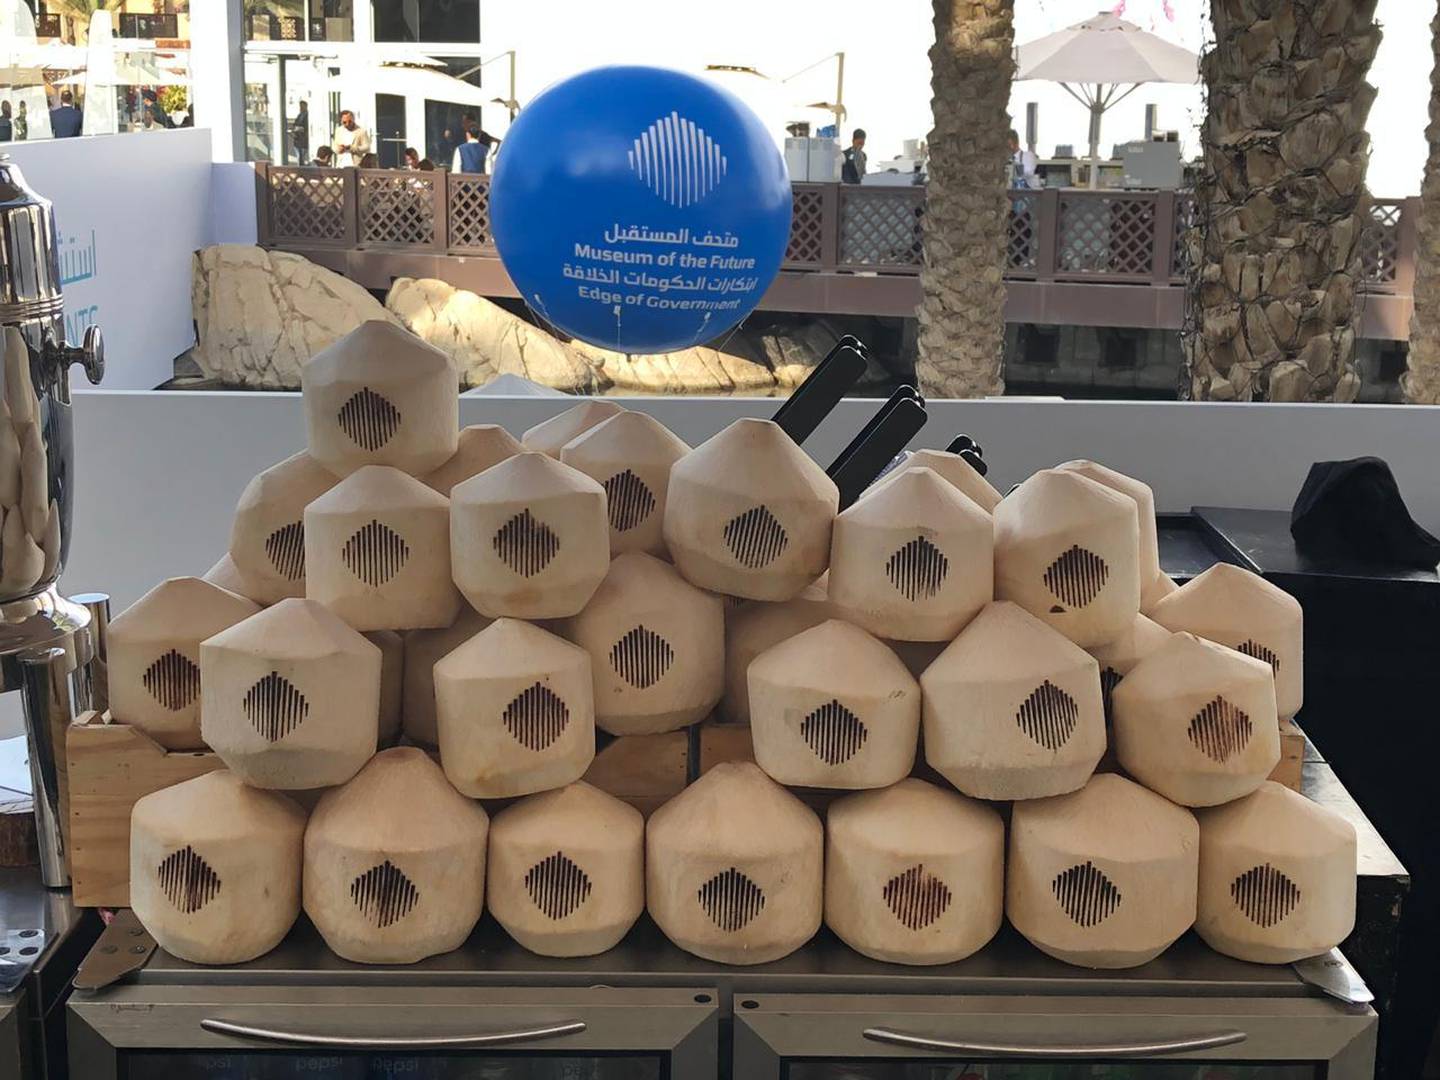 A stack of coconuts offering compostable hydration to attendees at the World Government Summit. Chris Whiteoak / The National